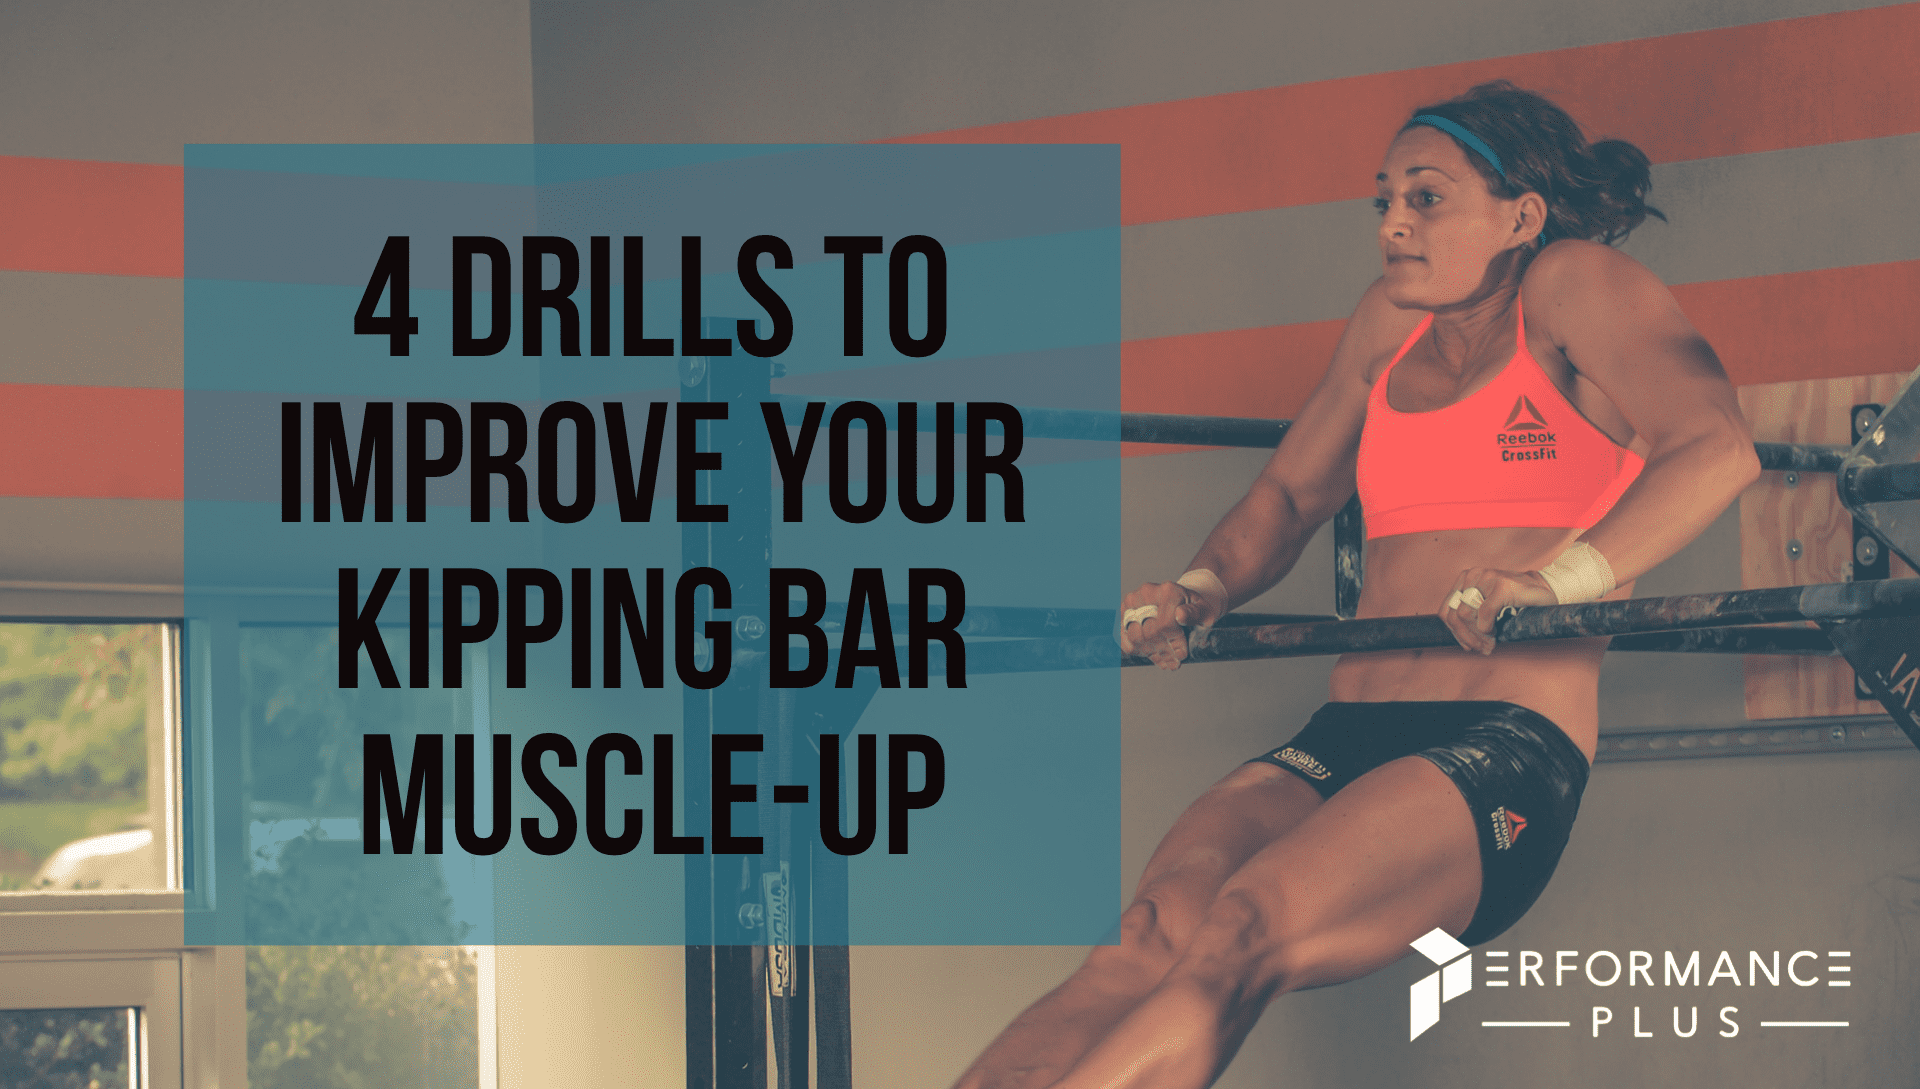 4 DRILLS TO IMPROVE YOUR KIPPING BAR MUSCLE-UP